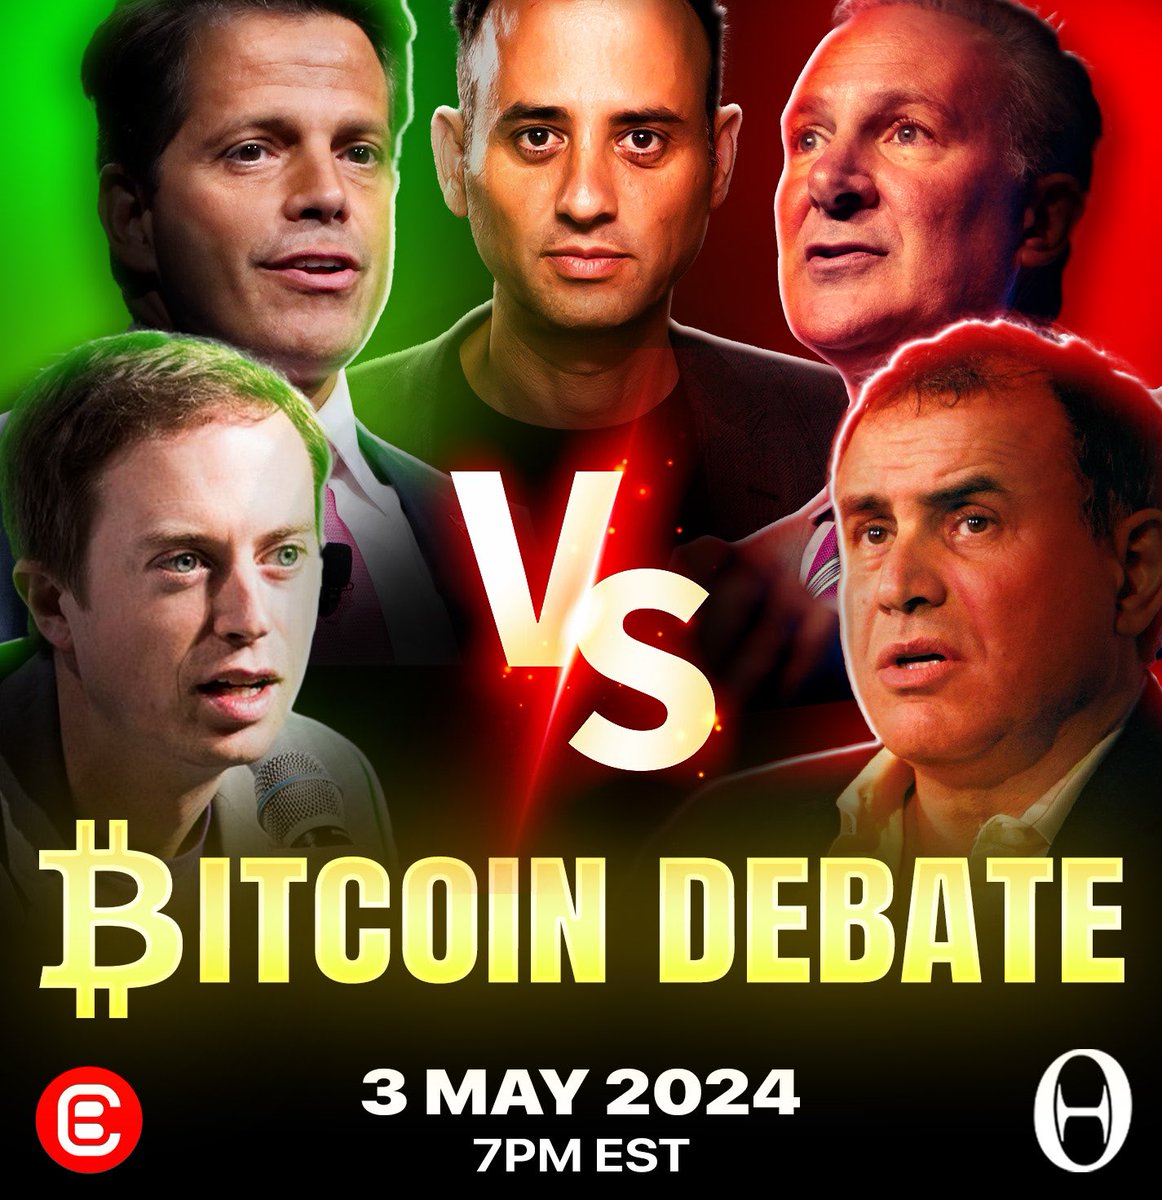 🚨$0 or $1M - THE GREAT DEBATE!🚨 At 7pm on May 3rd is a huge crypto debate between @Scaramucci @ErikVoorhees @Nouriel and @PeterSchiff to end this ONCE AND FOR ALL. It’s going to be interesting and BRUTAL! Live on @crypto_banter and @zerohedge ⏰ Set reminders NOW!!